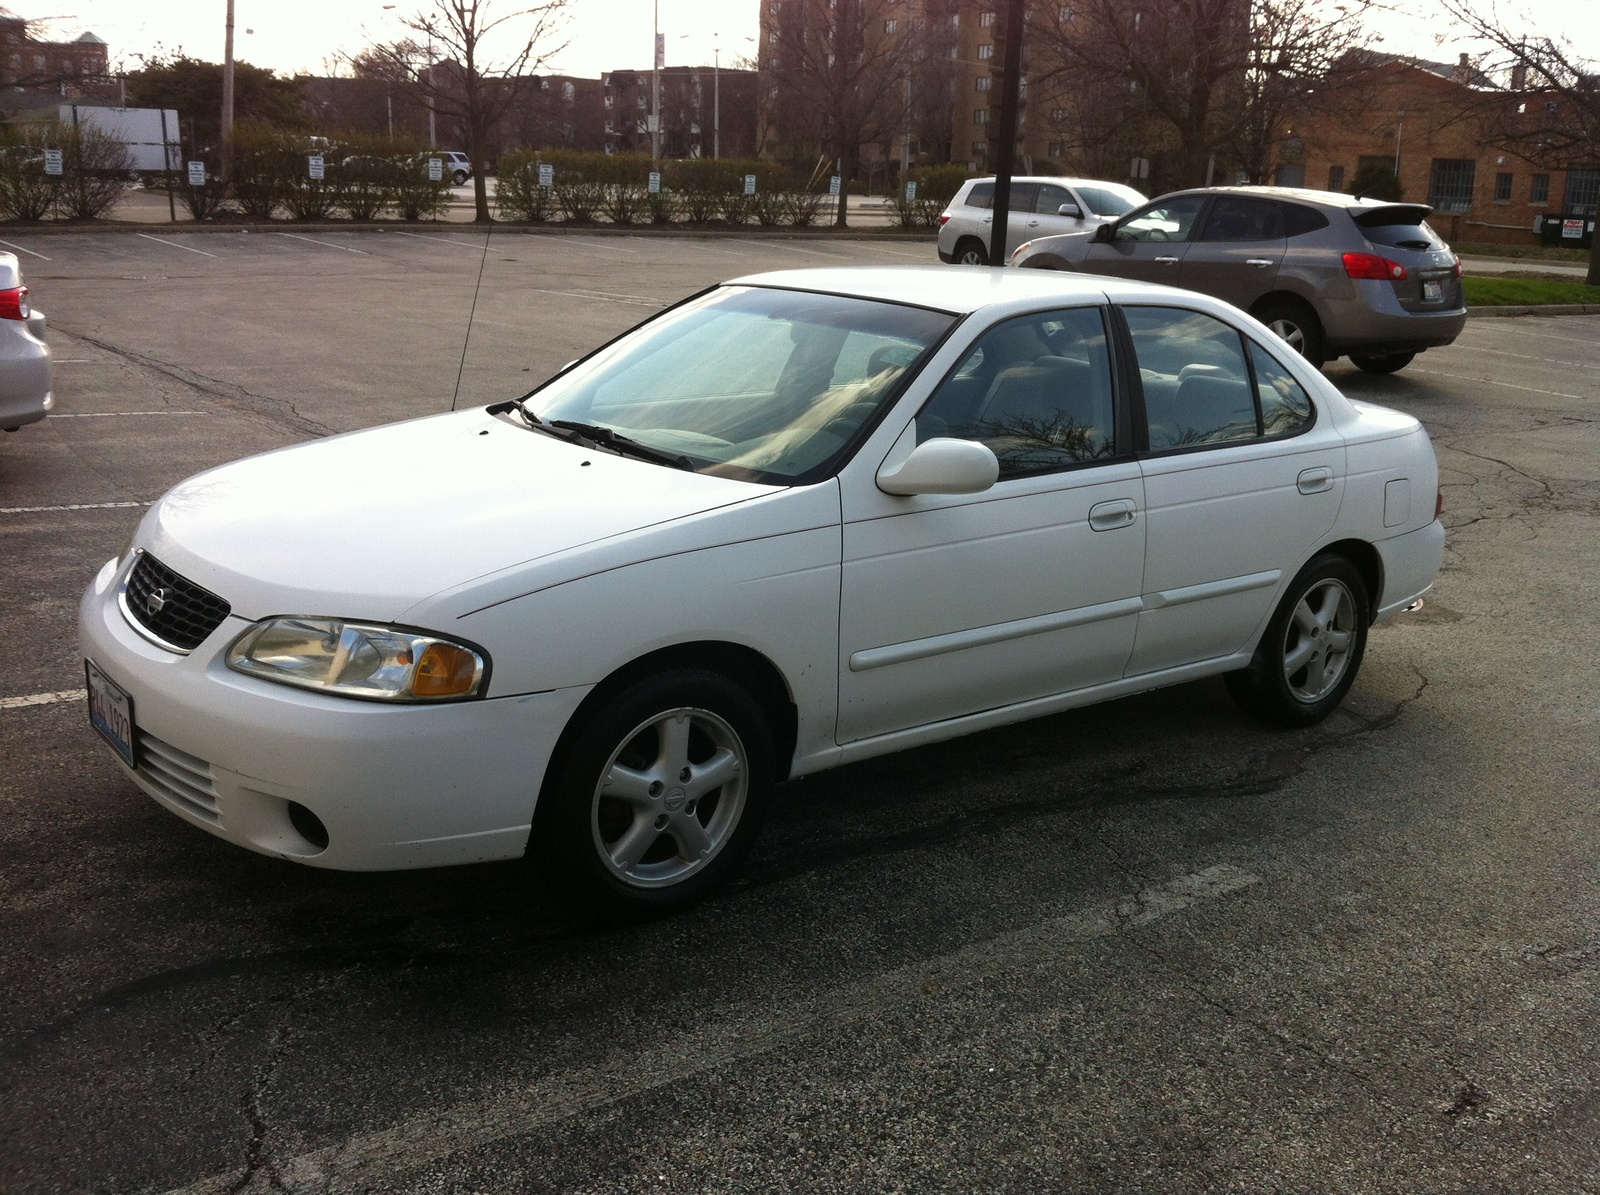 Used 2001 nissan sentra gxe review #5